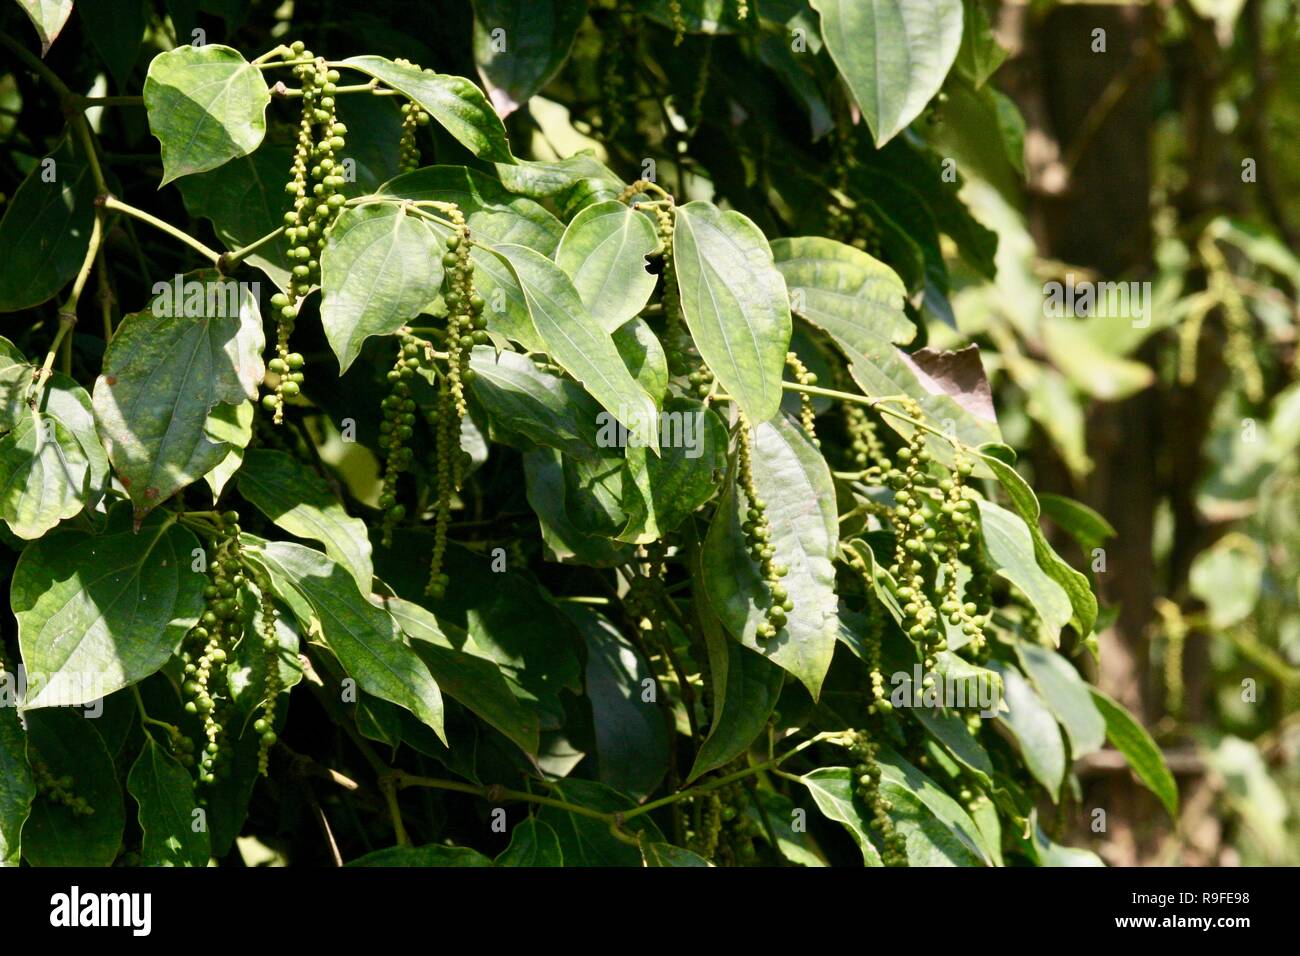 The king of spices, peppercorns on the pepper plant at a farm in Cambodia Stock Photo